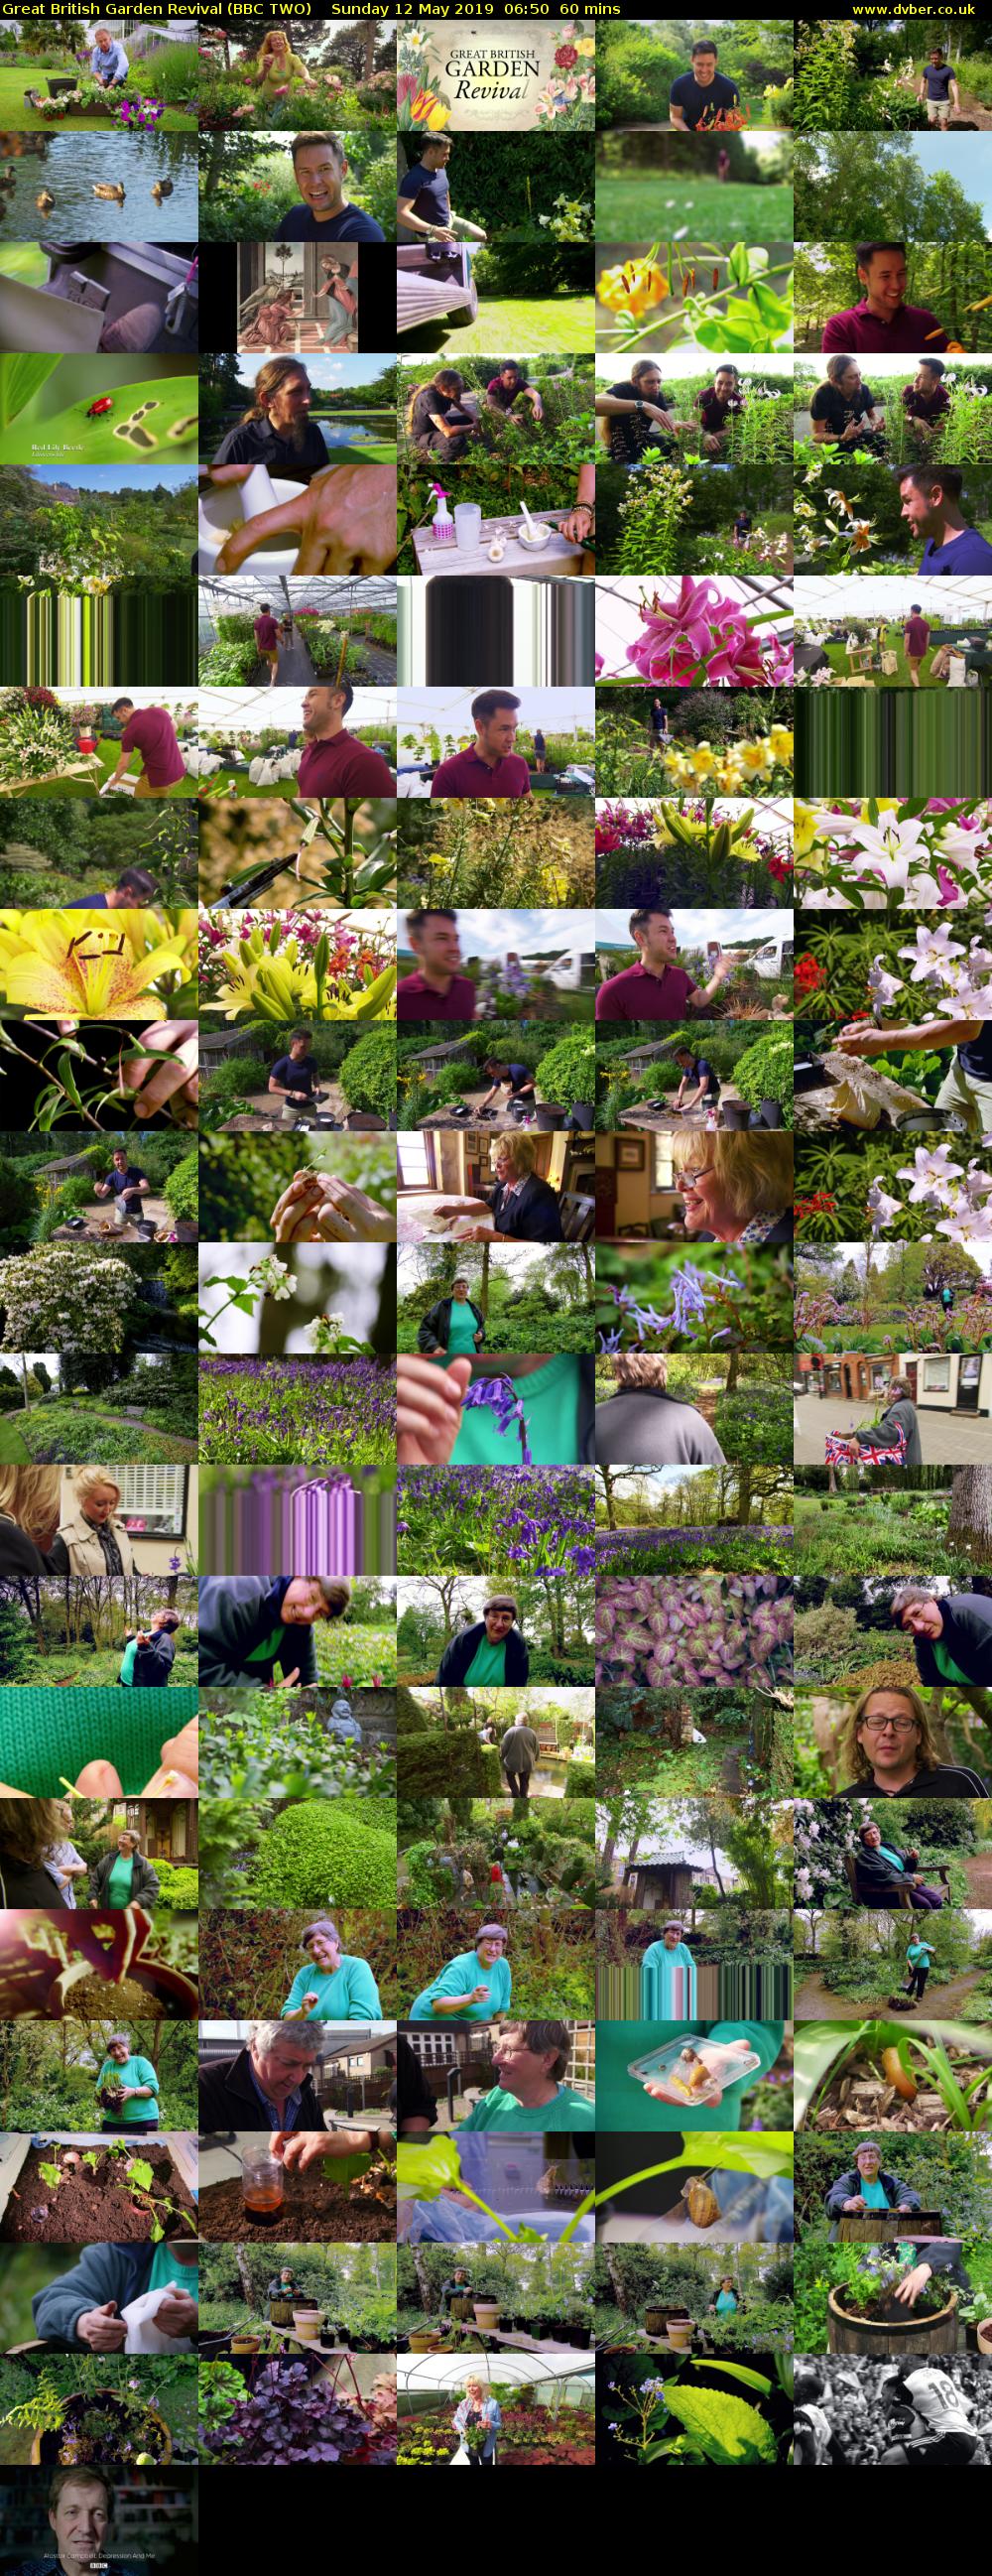 Great British Garden Revival (BBC TWO) Sunday 12 May 2019 06:50 - 07:50